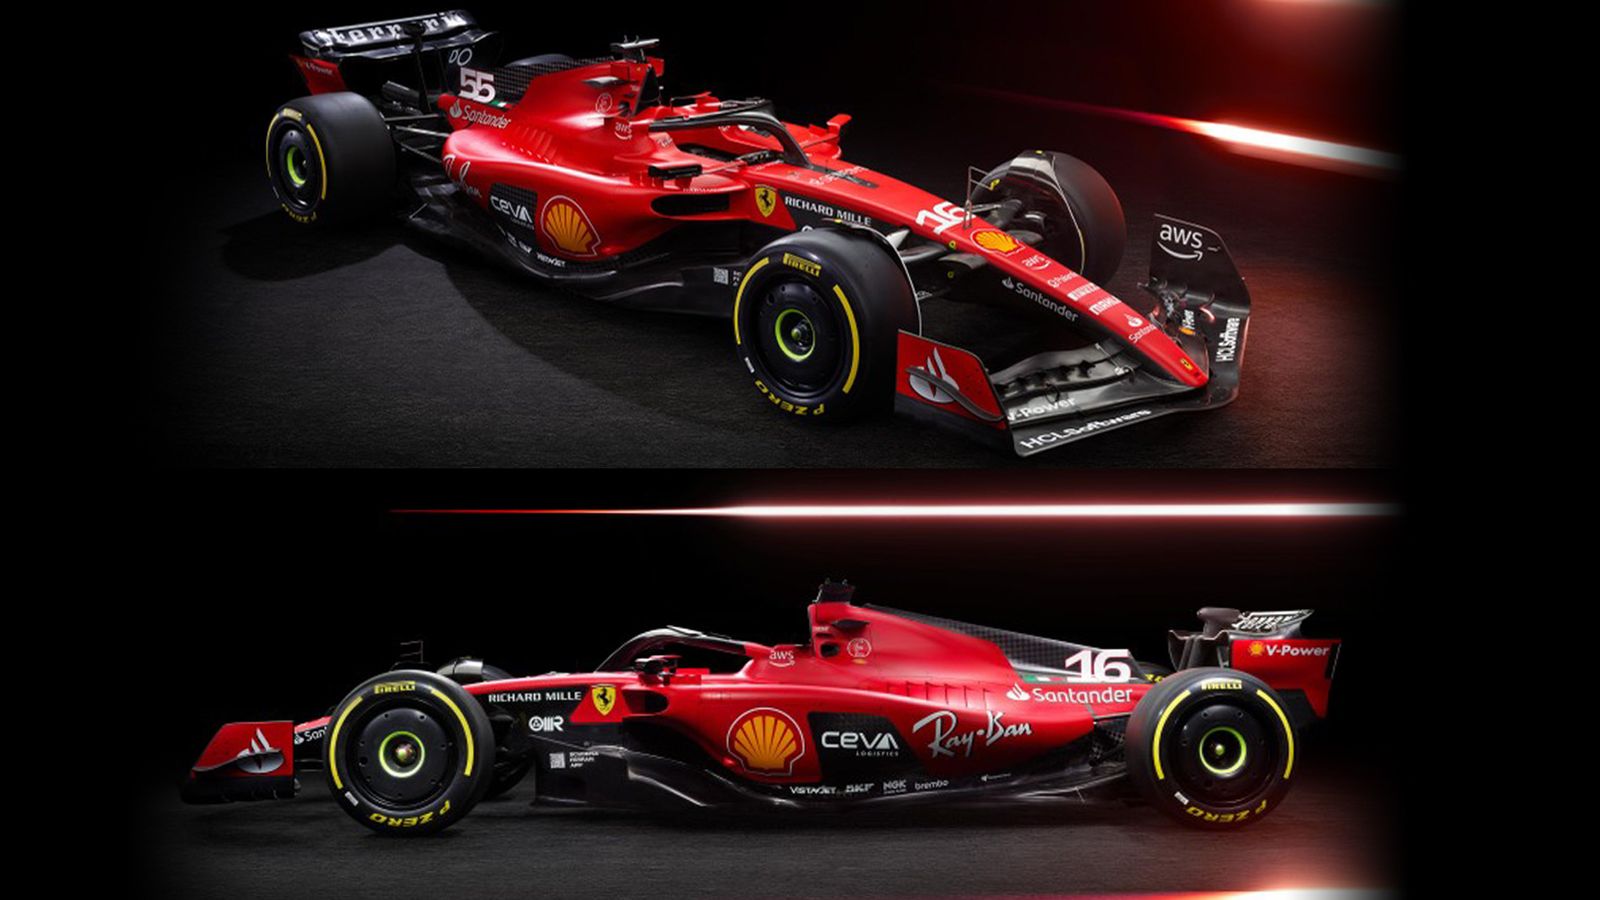 Ferrari reveal their 'Valentine' as new car launched for 2023 Formula 1 championship challenge